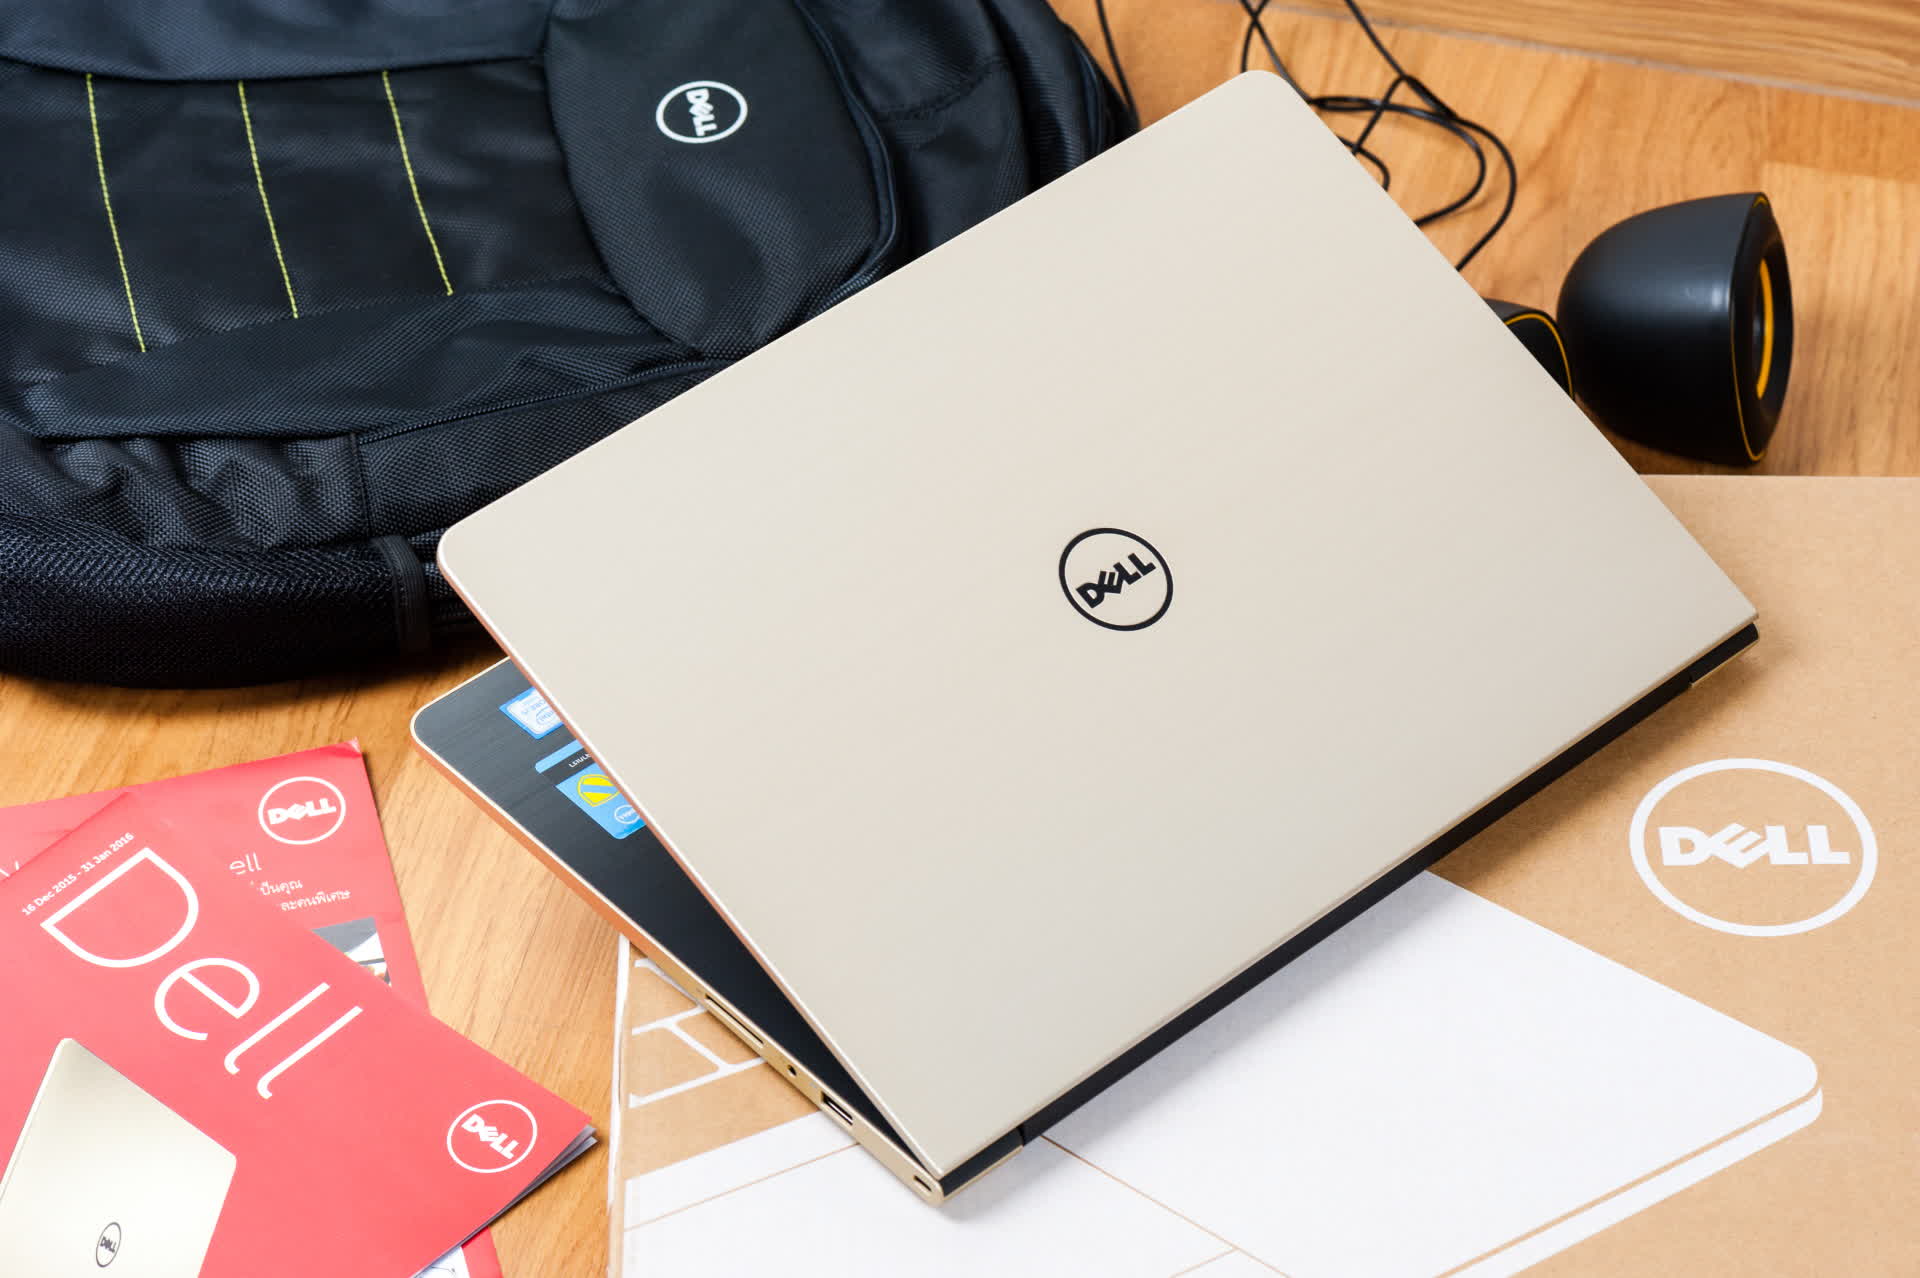 Dell is testing reverse wireless charging on laptops, patent shows